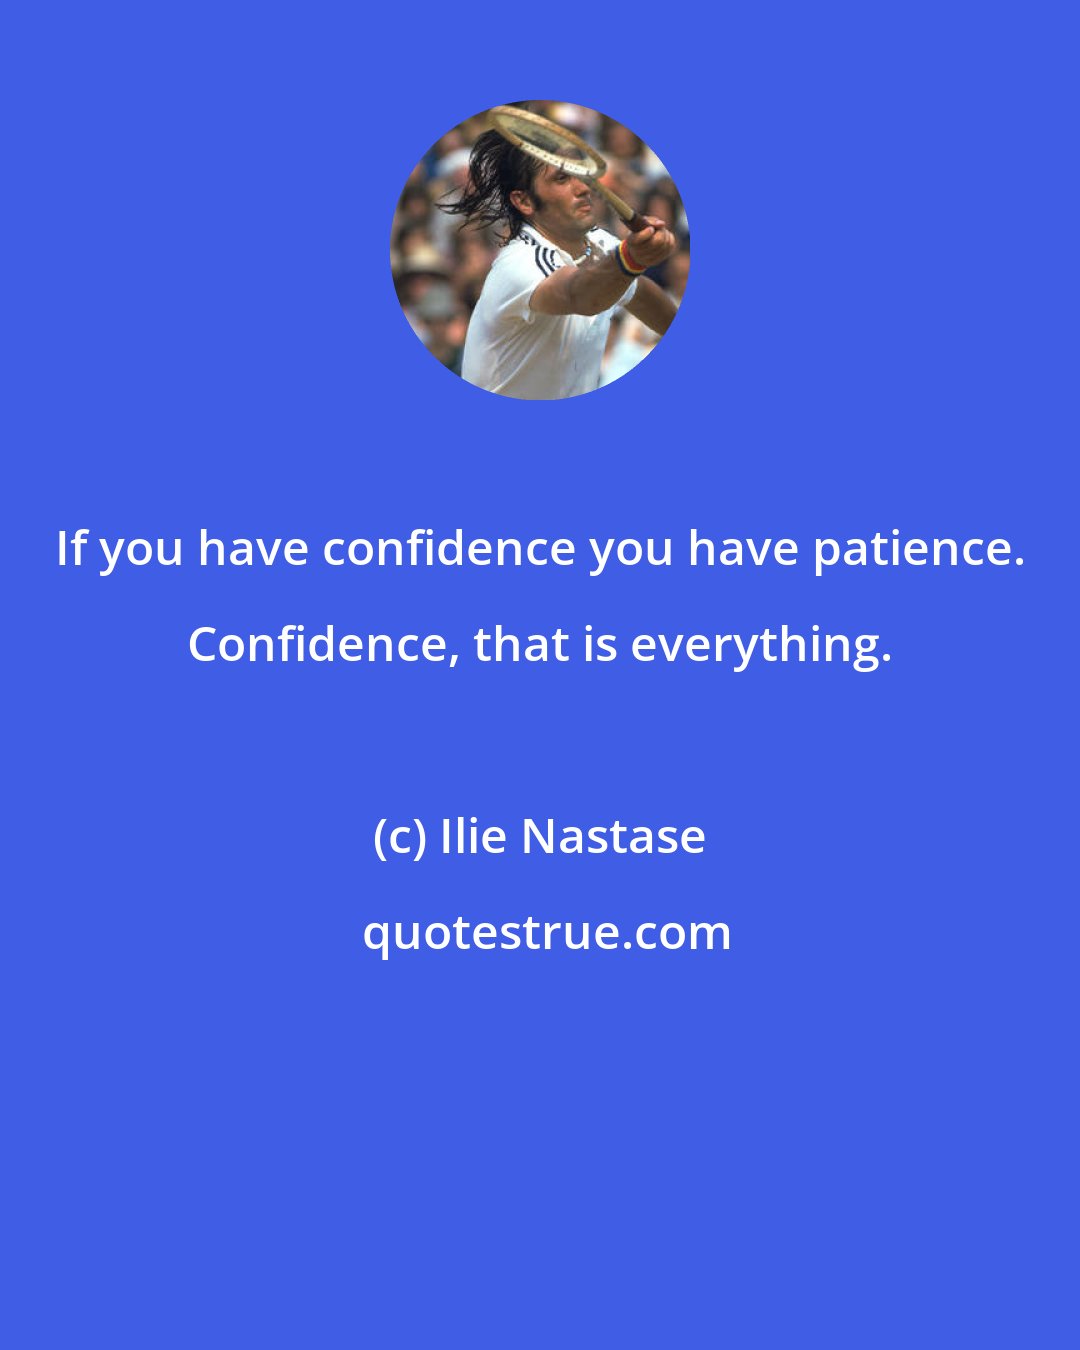 Ilie Nastase: If you have confidence you have patience. Confidence, that is everything.